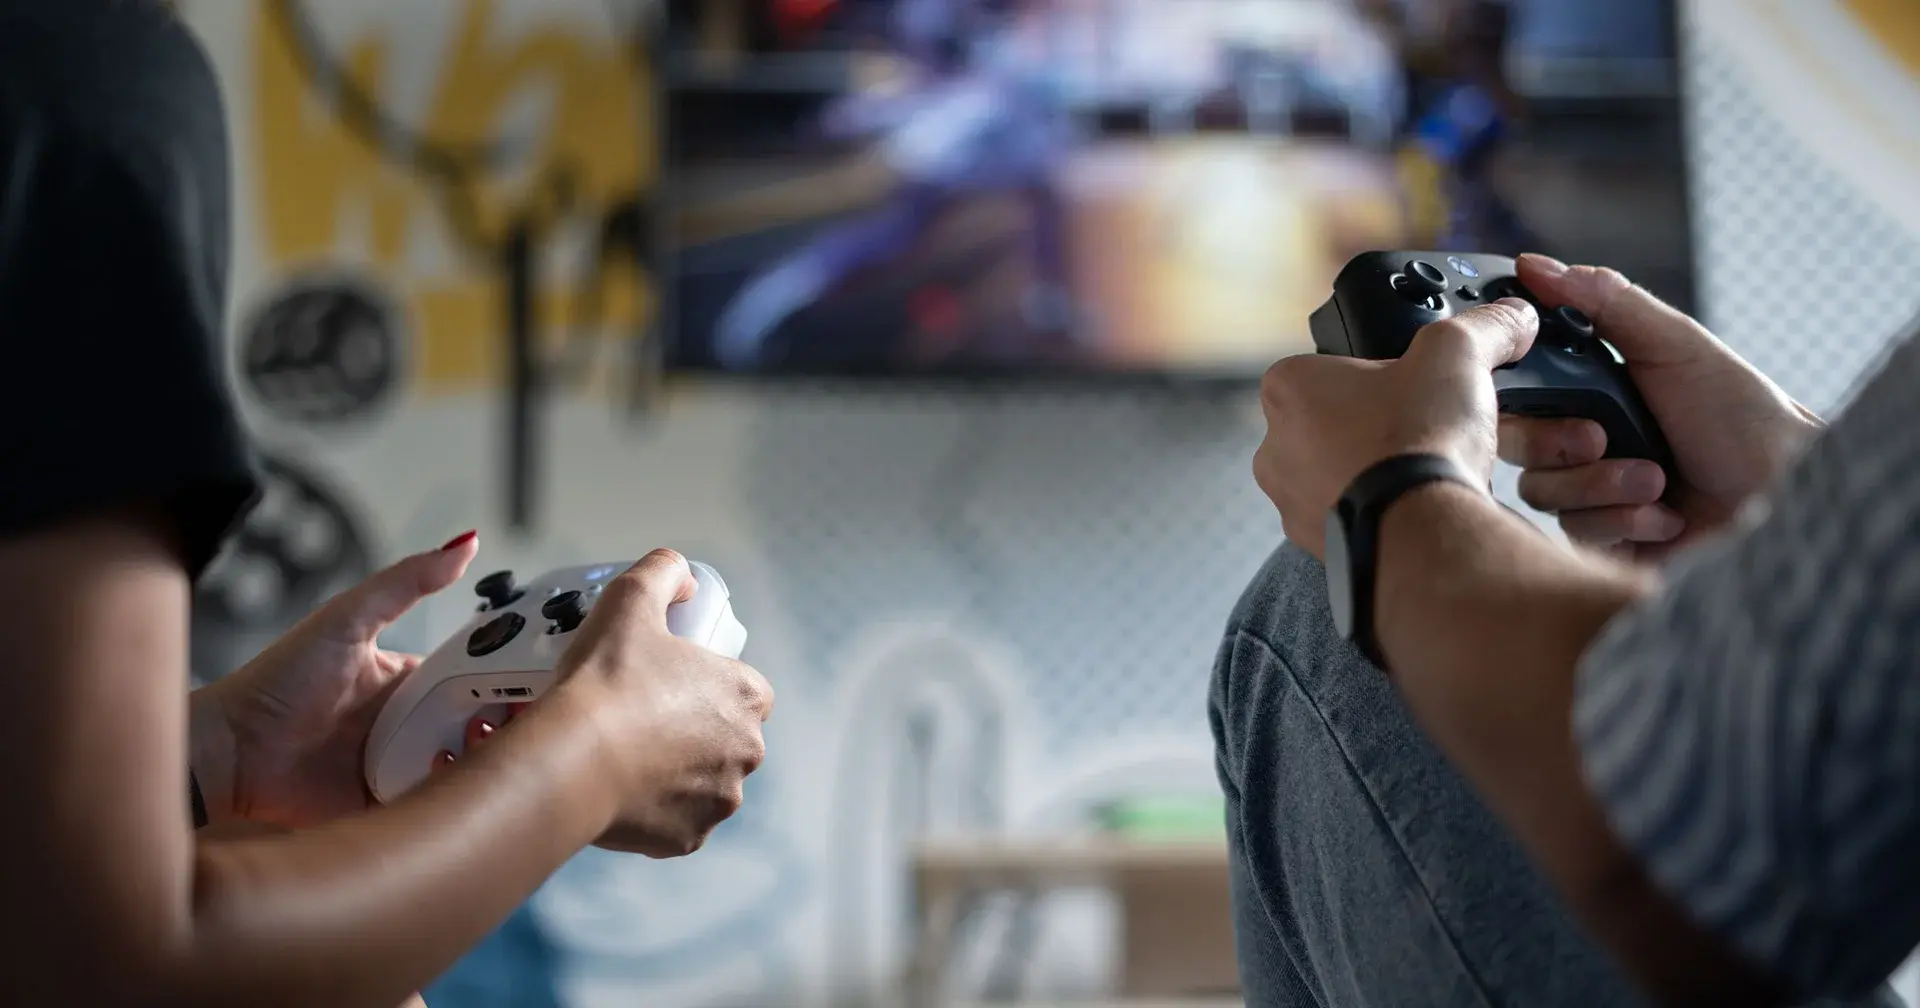 a man and women holding Xbox video game controllers and playing a video game together